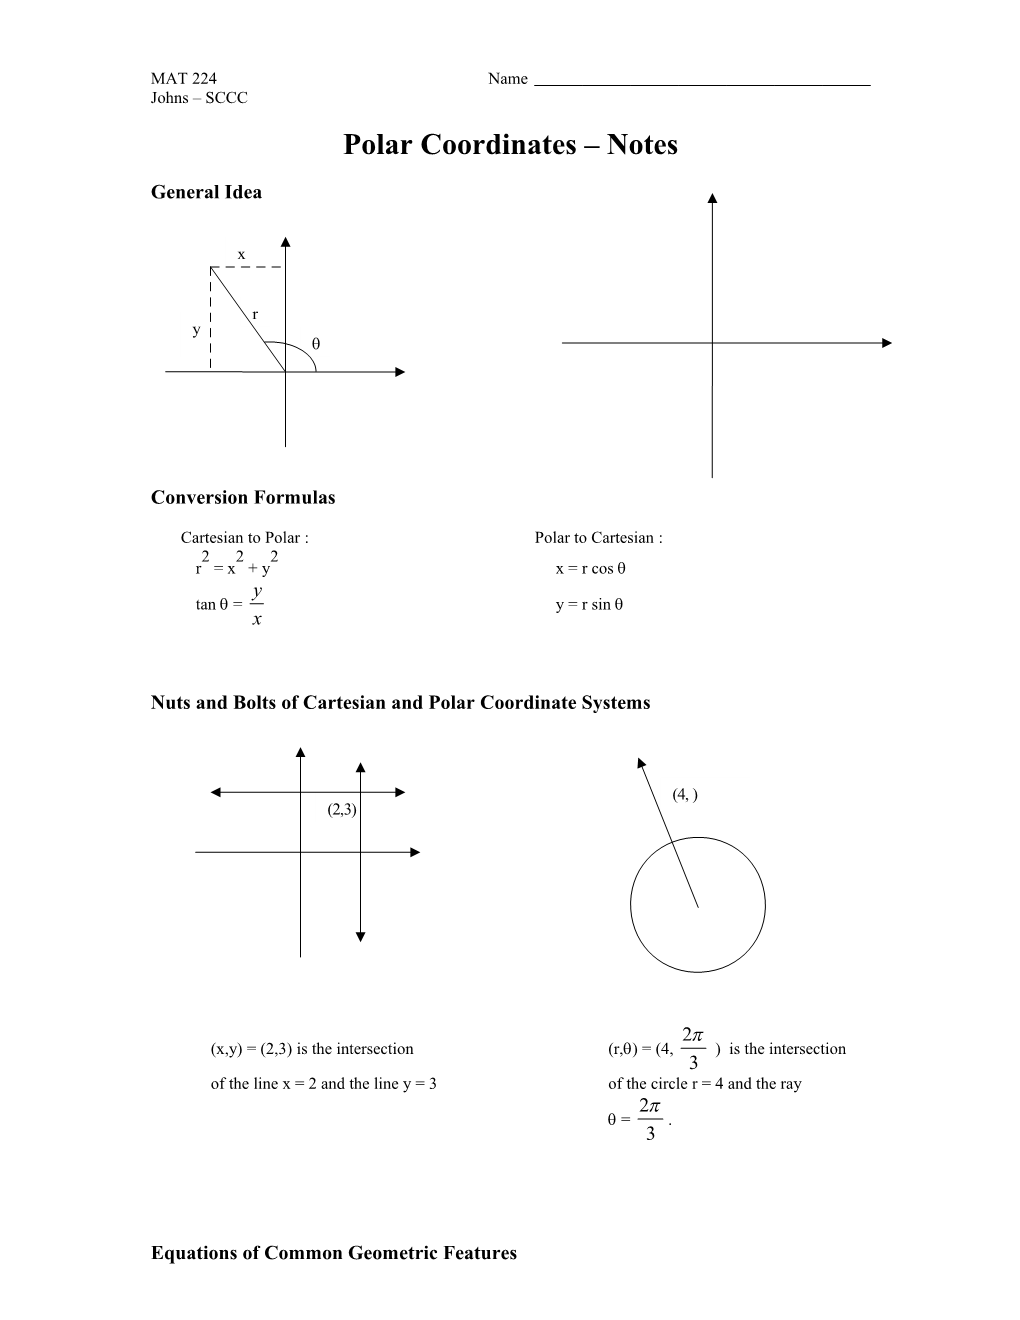 Nuts and Bolts of Cartesian and Polar Coordinate Systems